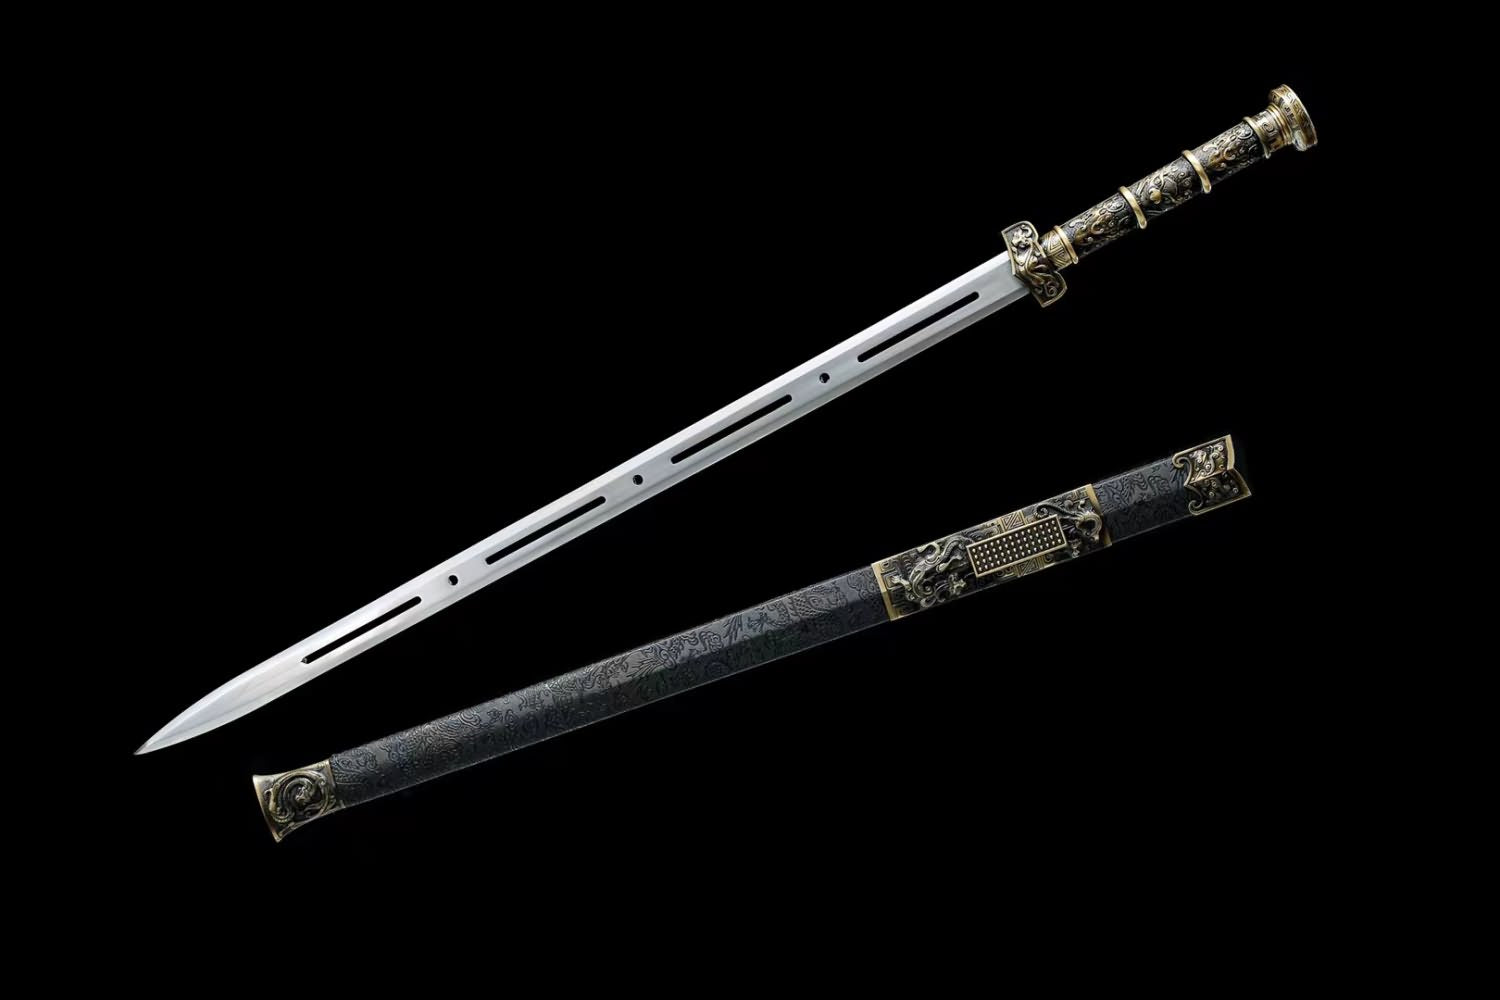 chinese sword,Han jian Forged Hollow Blade,Alloy Fittings,PU Scabbard Length 40"